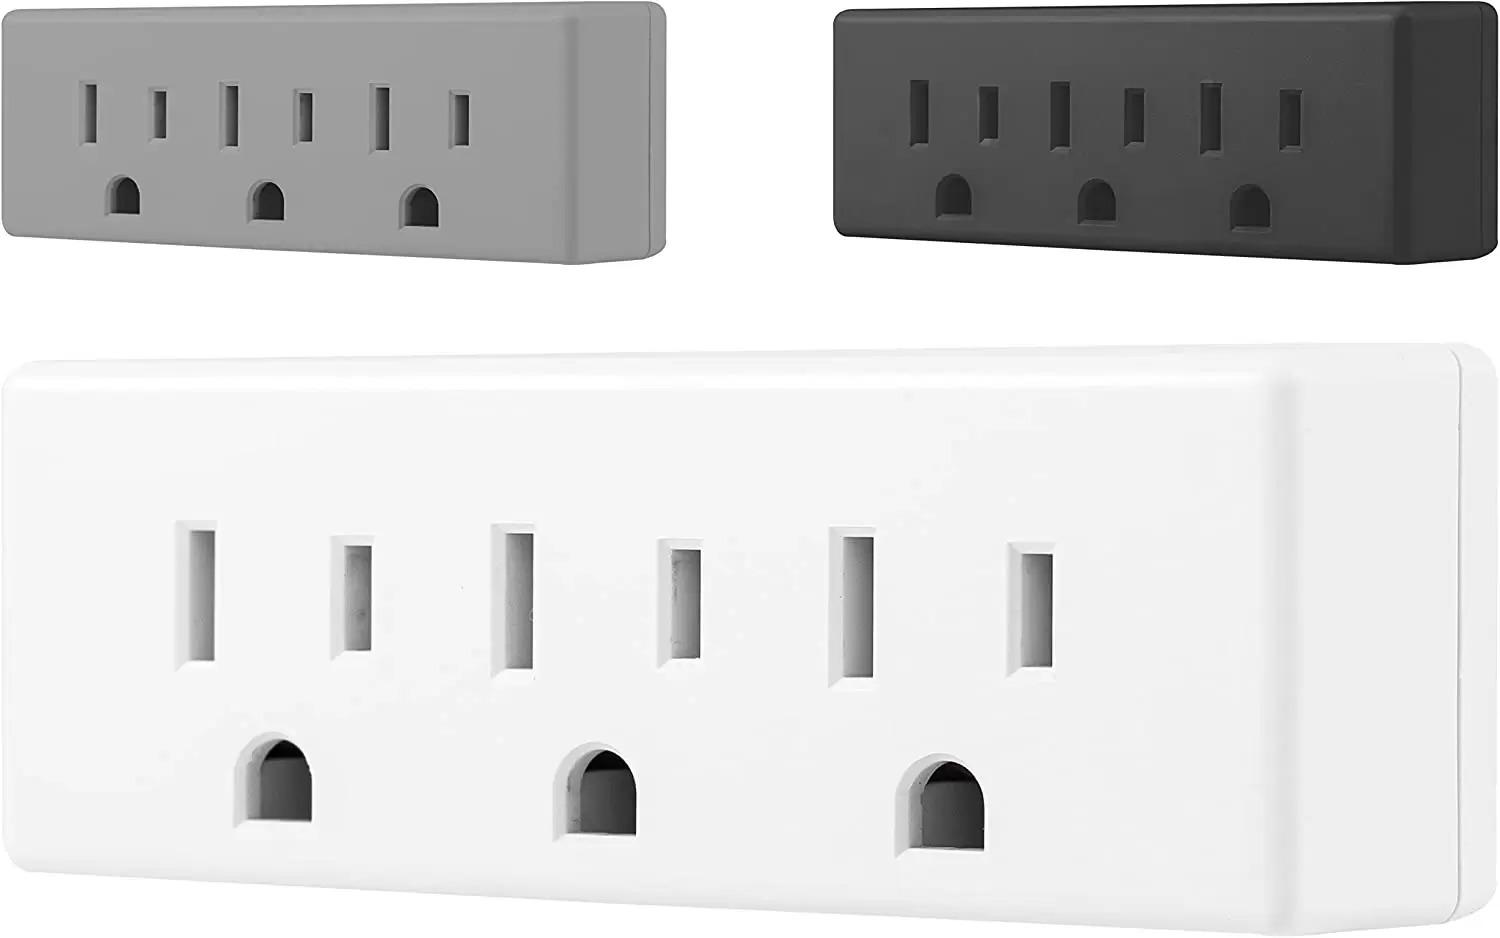 GE Home 3-Outlet Electric Extender 3-Prong Grounded Wall Tap for $2.22